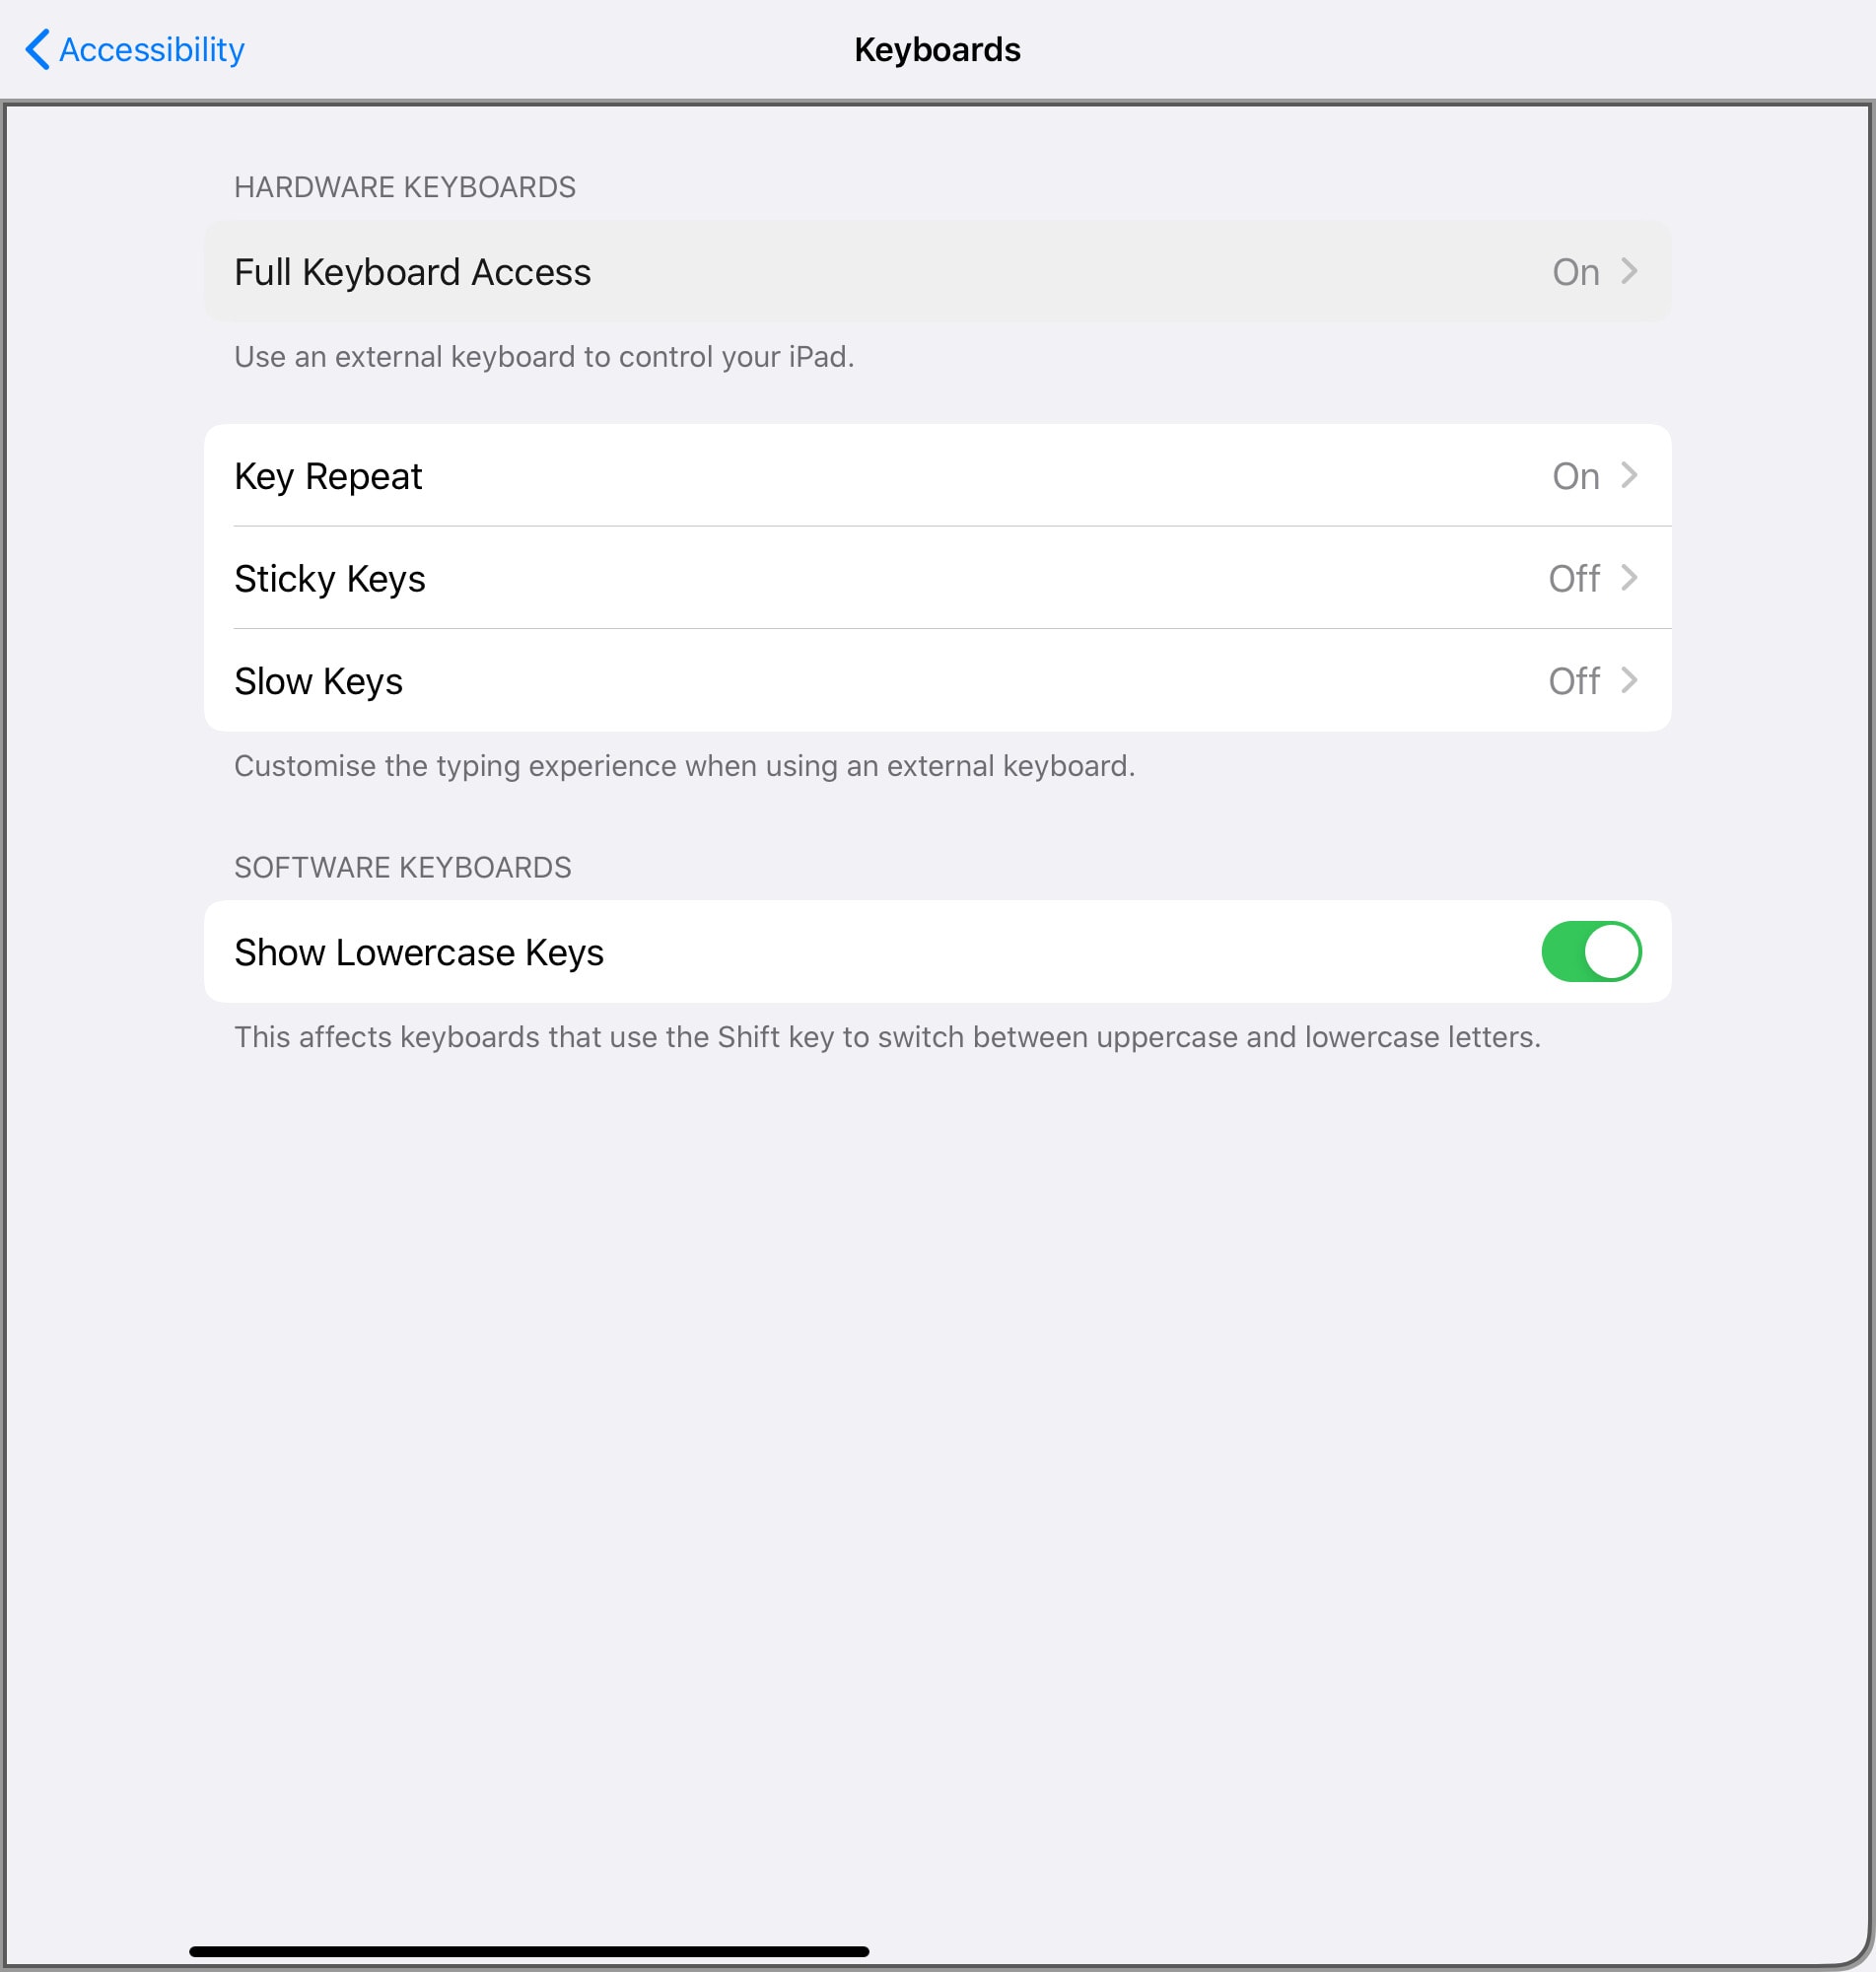 Switch on Full Keyboard Access in the Settings app.